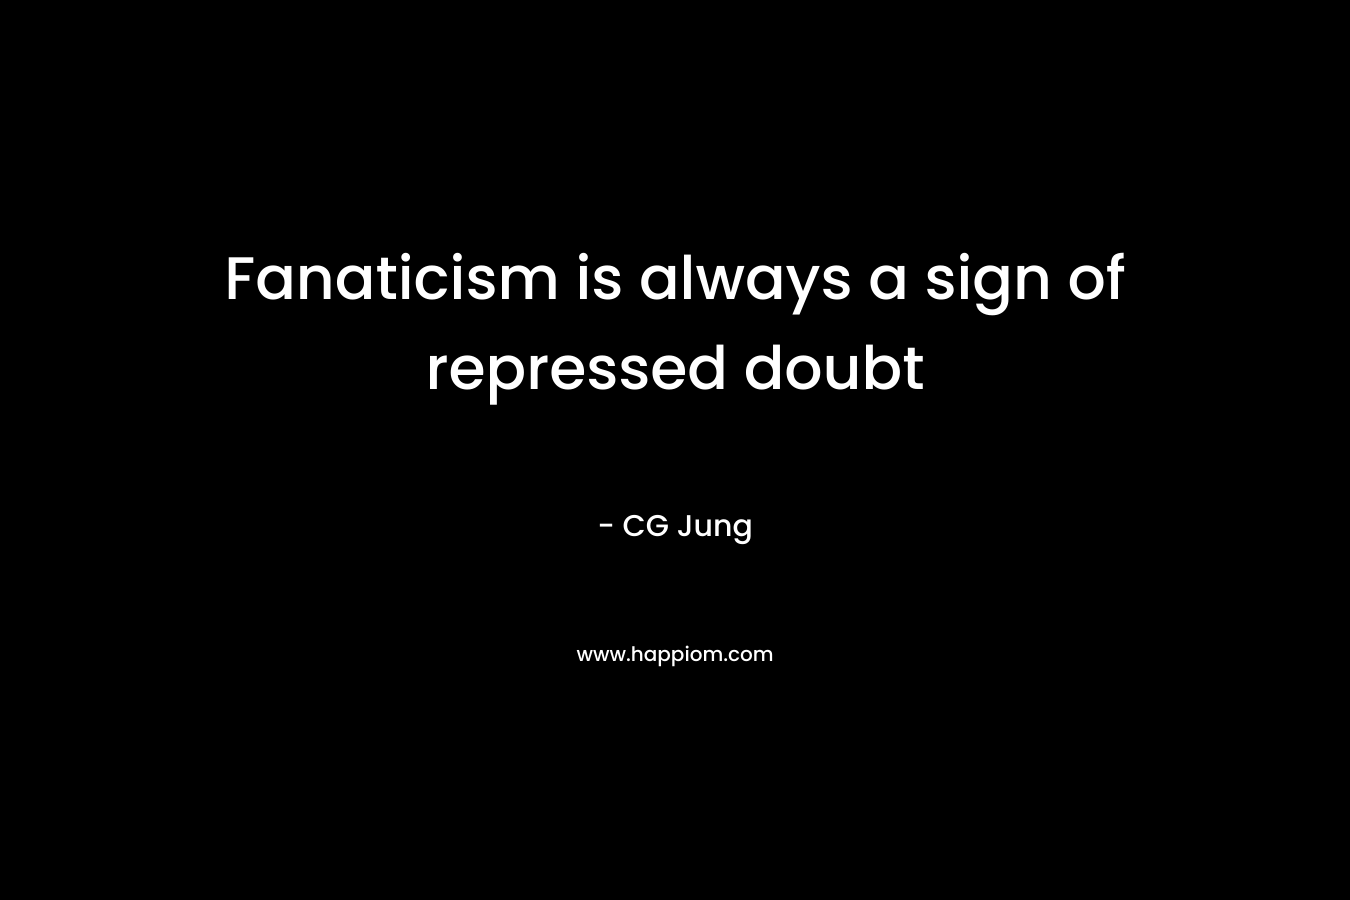 Fanaticism is always a sign of repressed doubt – CG Jung